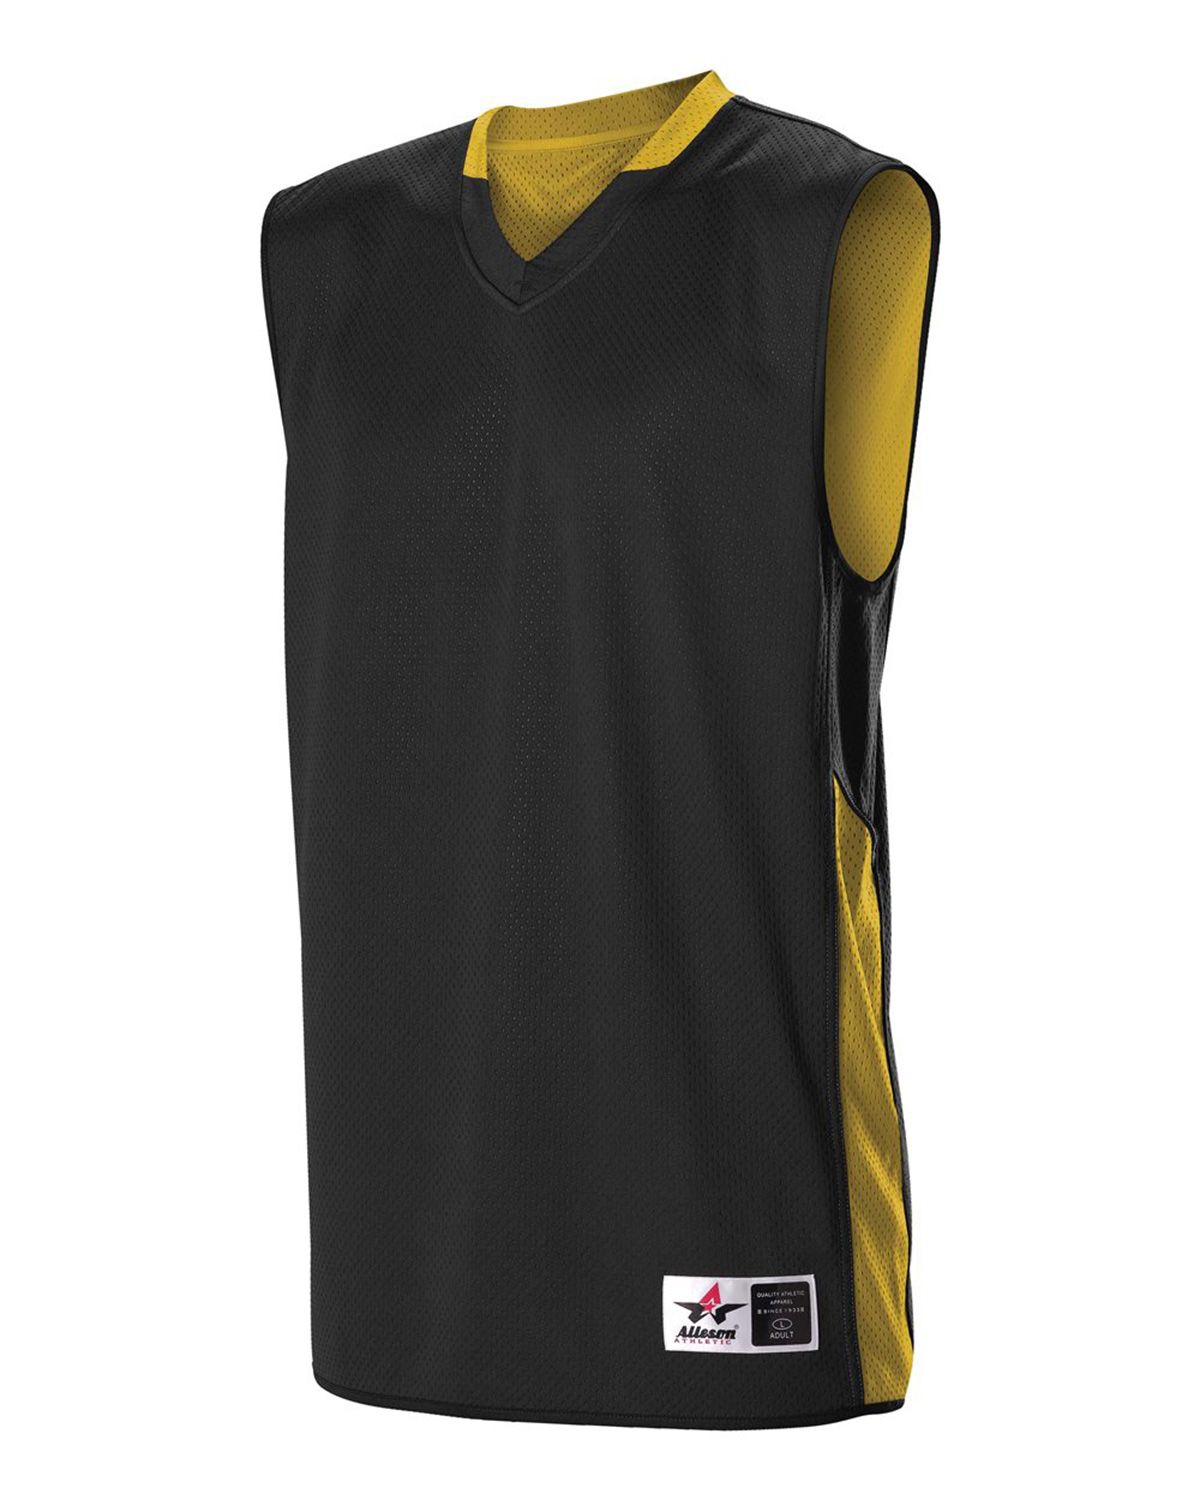 16 Colors in Youth, Adult /& Ladies Sizes Reversible Basketball Tank Mesh Jersey Uniform